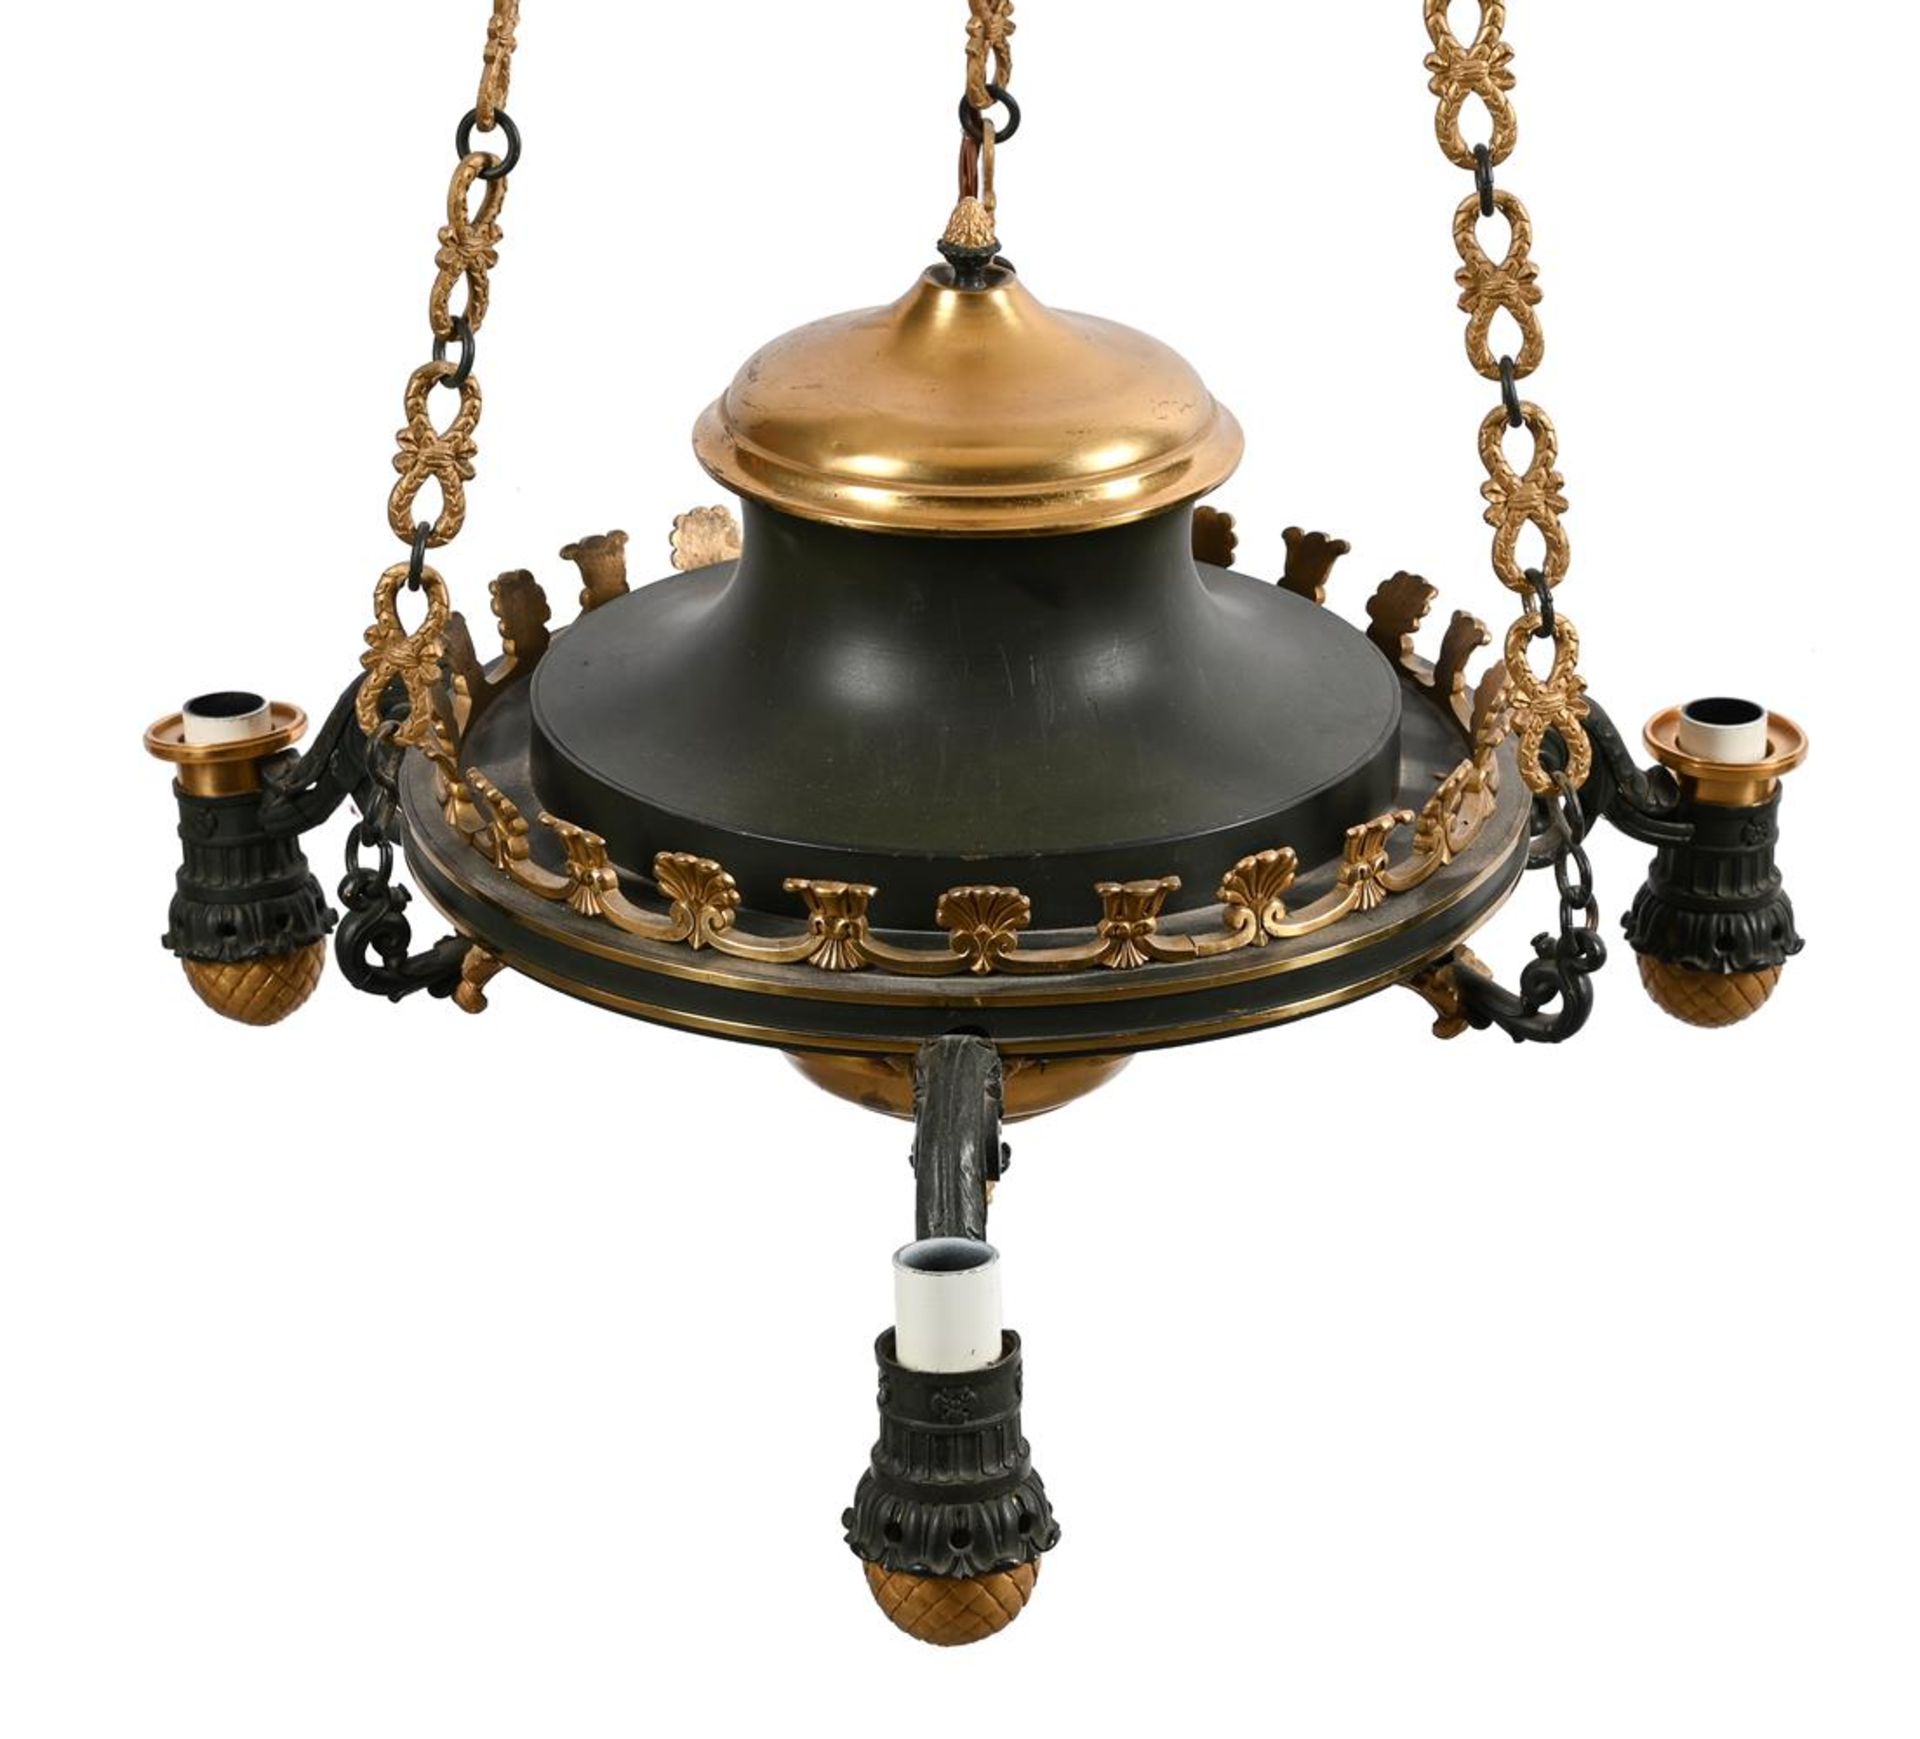 A FRENCH PATINATED AND GILT BRONZE THREE LIGHT CHANDELIER,19TH/EARLY 20TH CENTURY - Image 2 of 3